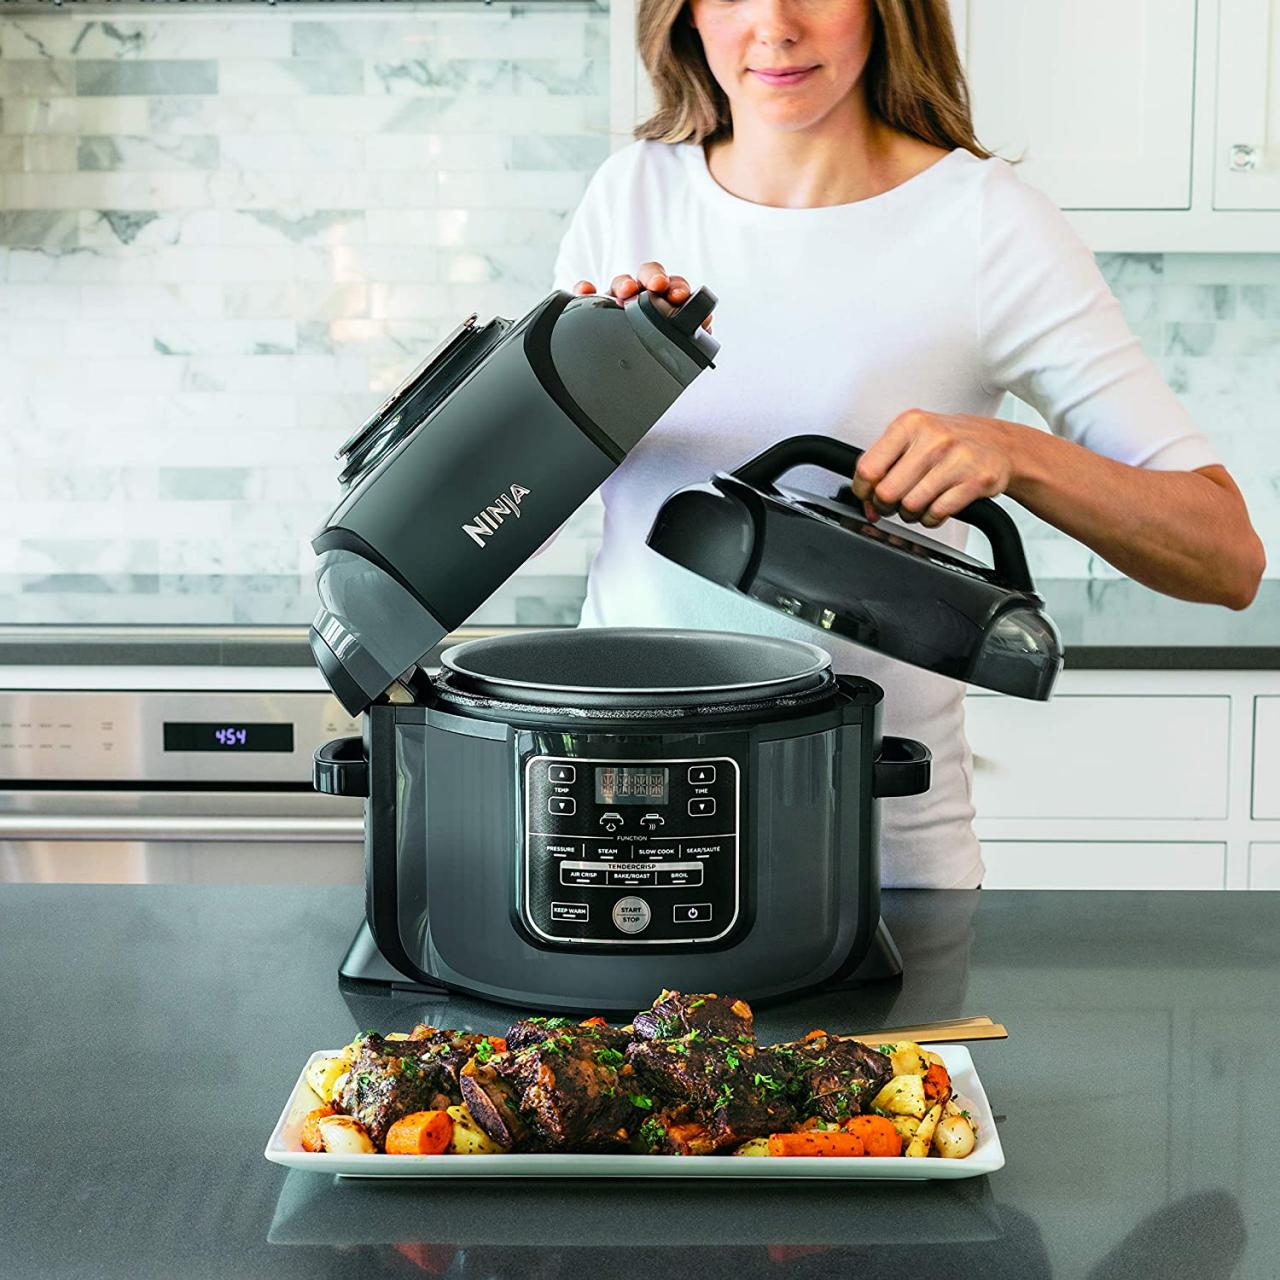 https://food.fnr.sndimg.com/content/dam/images/food/products/2020/8/3/rx_ninja-foodi-9-in-1-pressure-slow-cooker-air-fryer-and-more.jpeg.rend.hgtvcom.1280.1280.suffix/1596477009219.jpeg